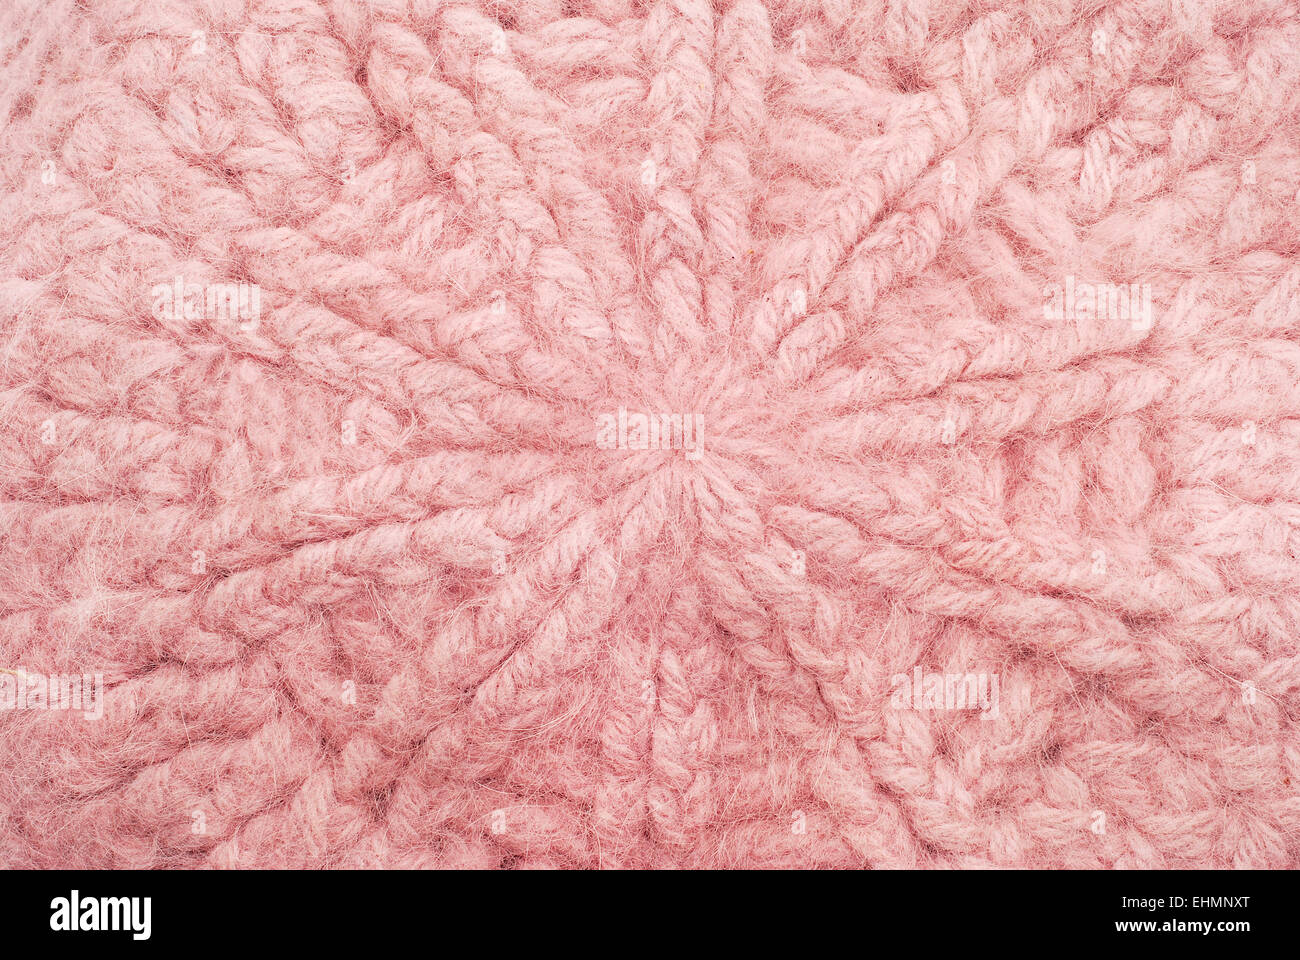 pink wool fabric texture detail Stock Photo - Alamy